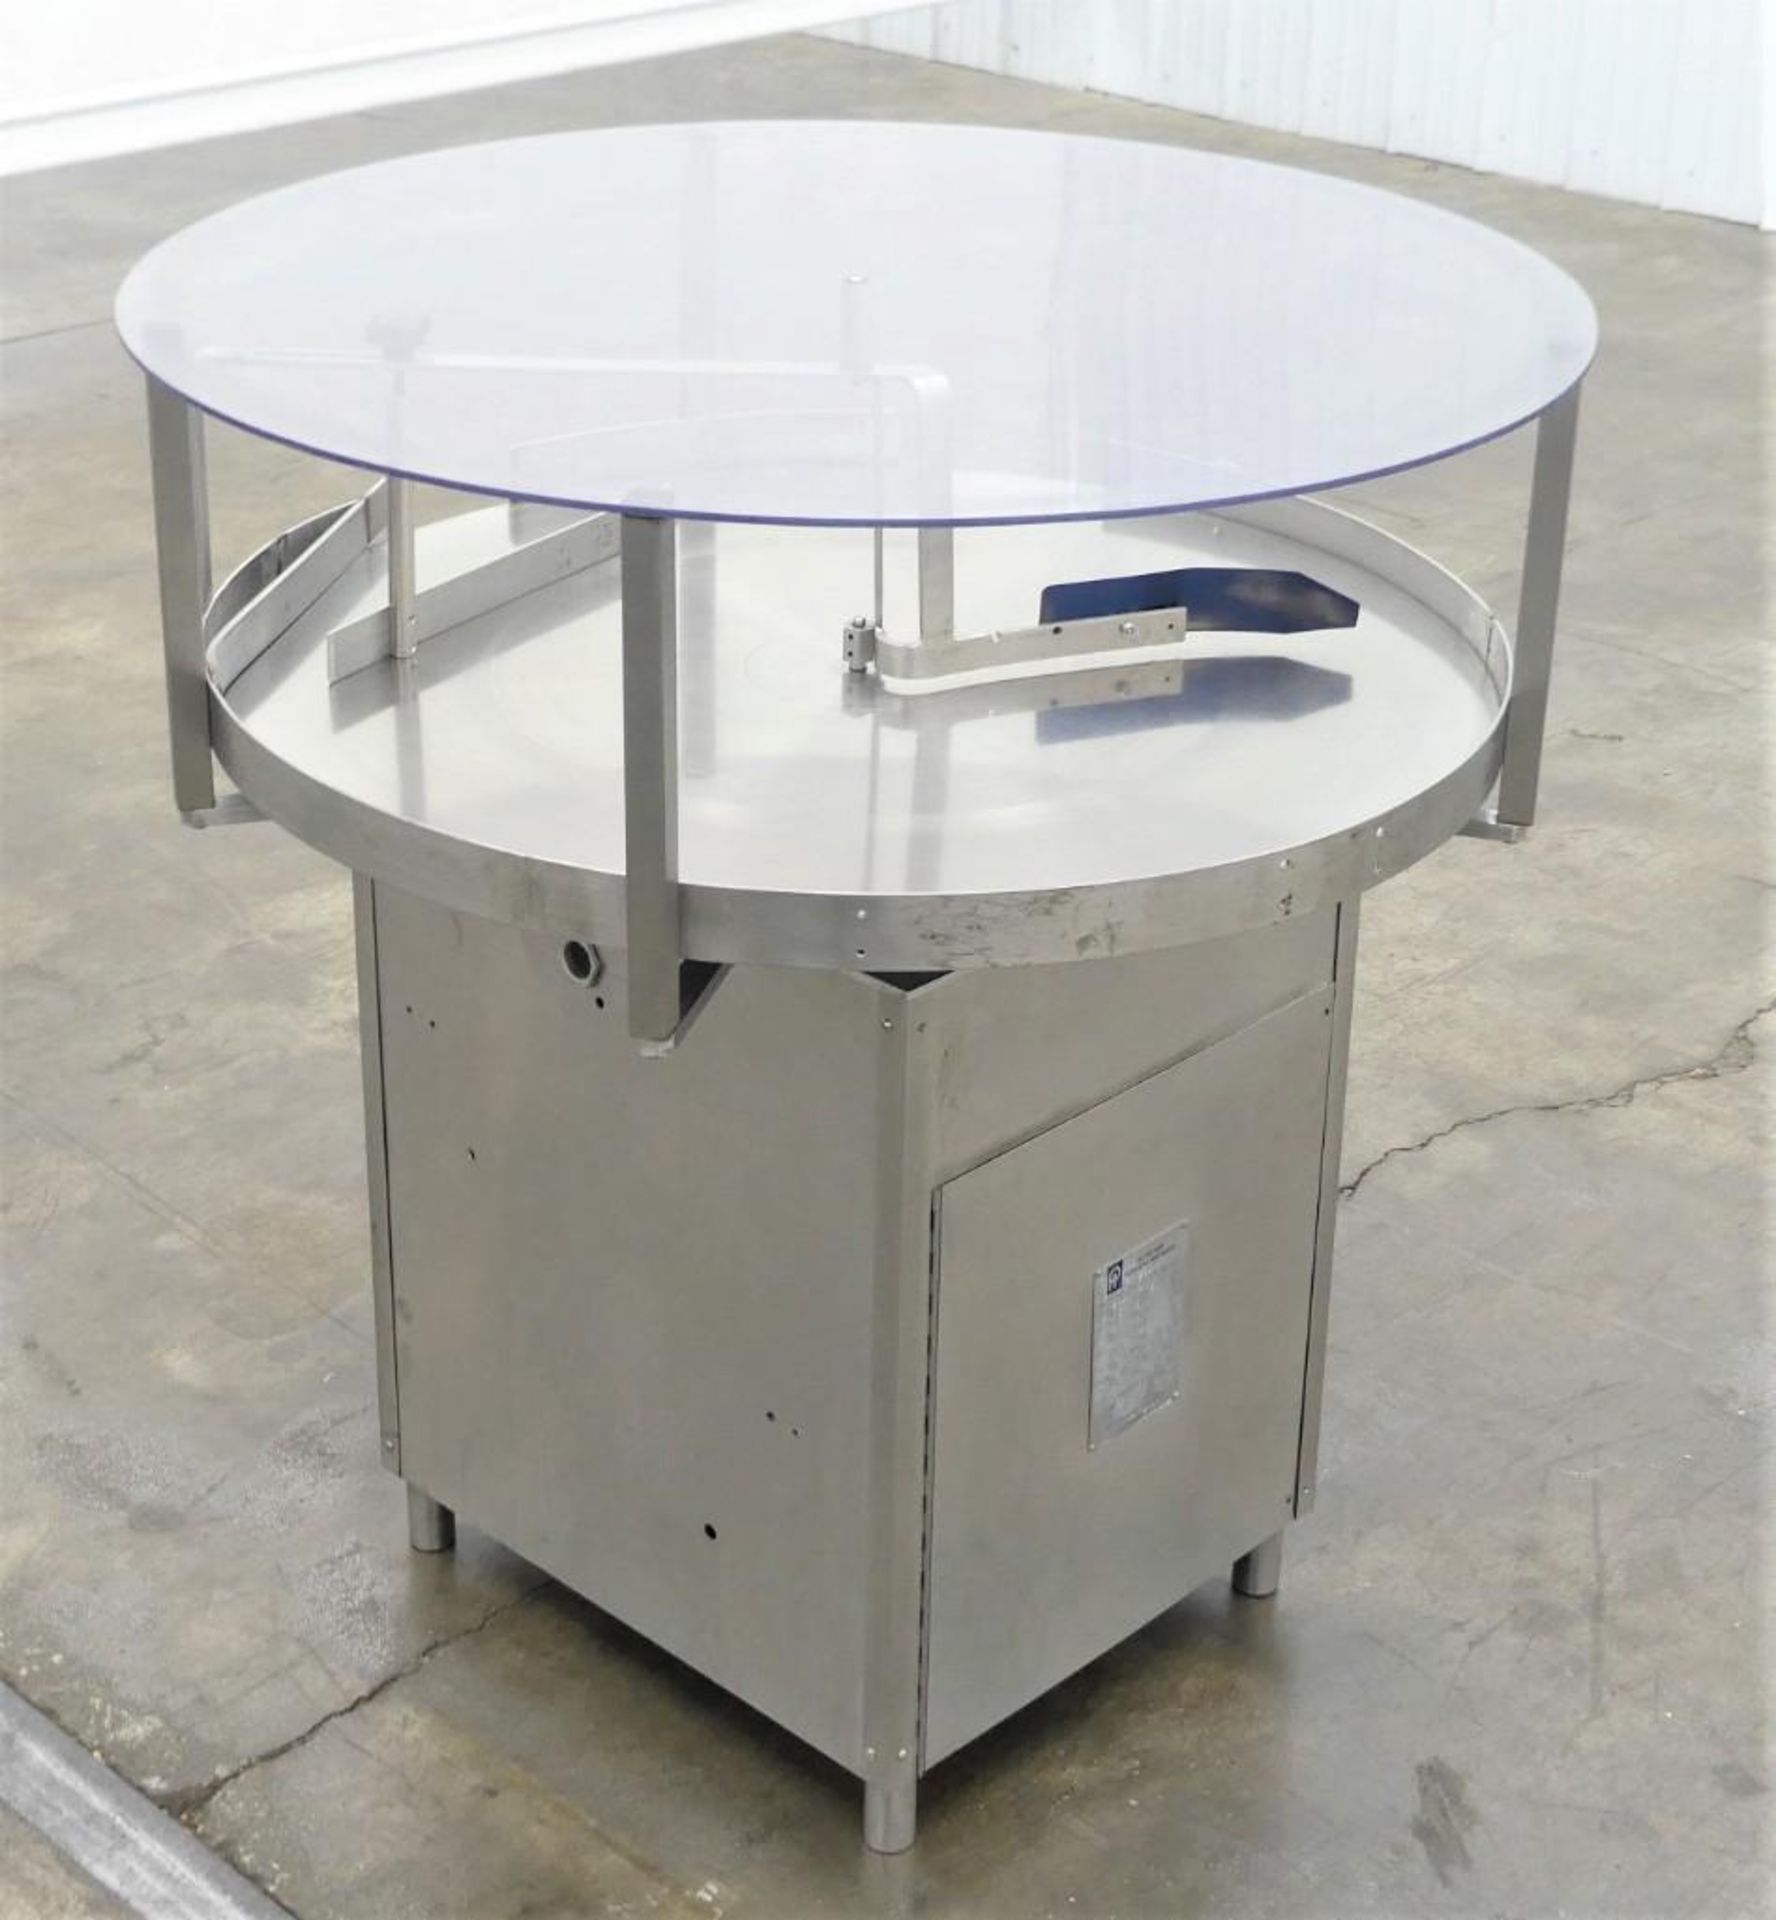 36" Rotary Accumulation Table - Image 2 of 3